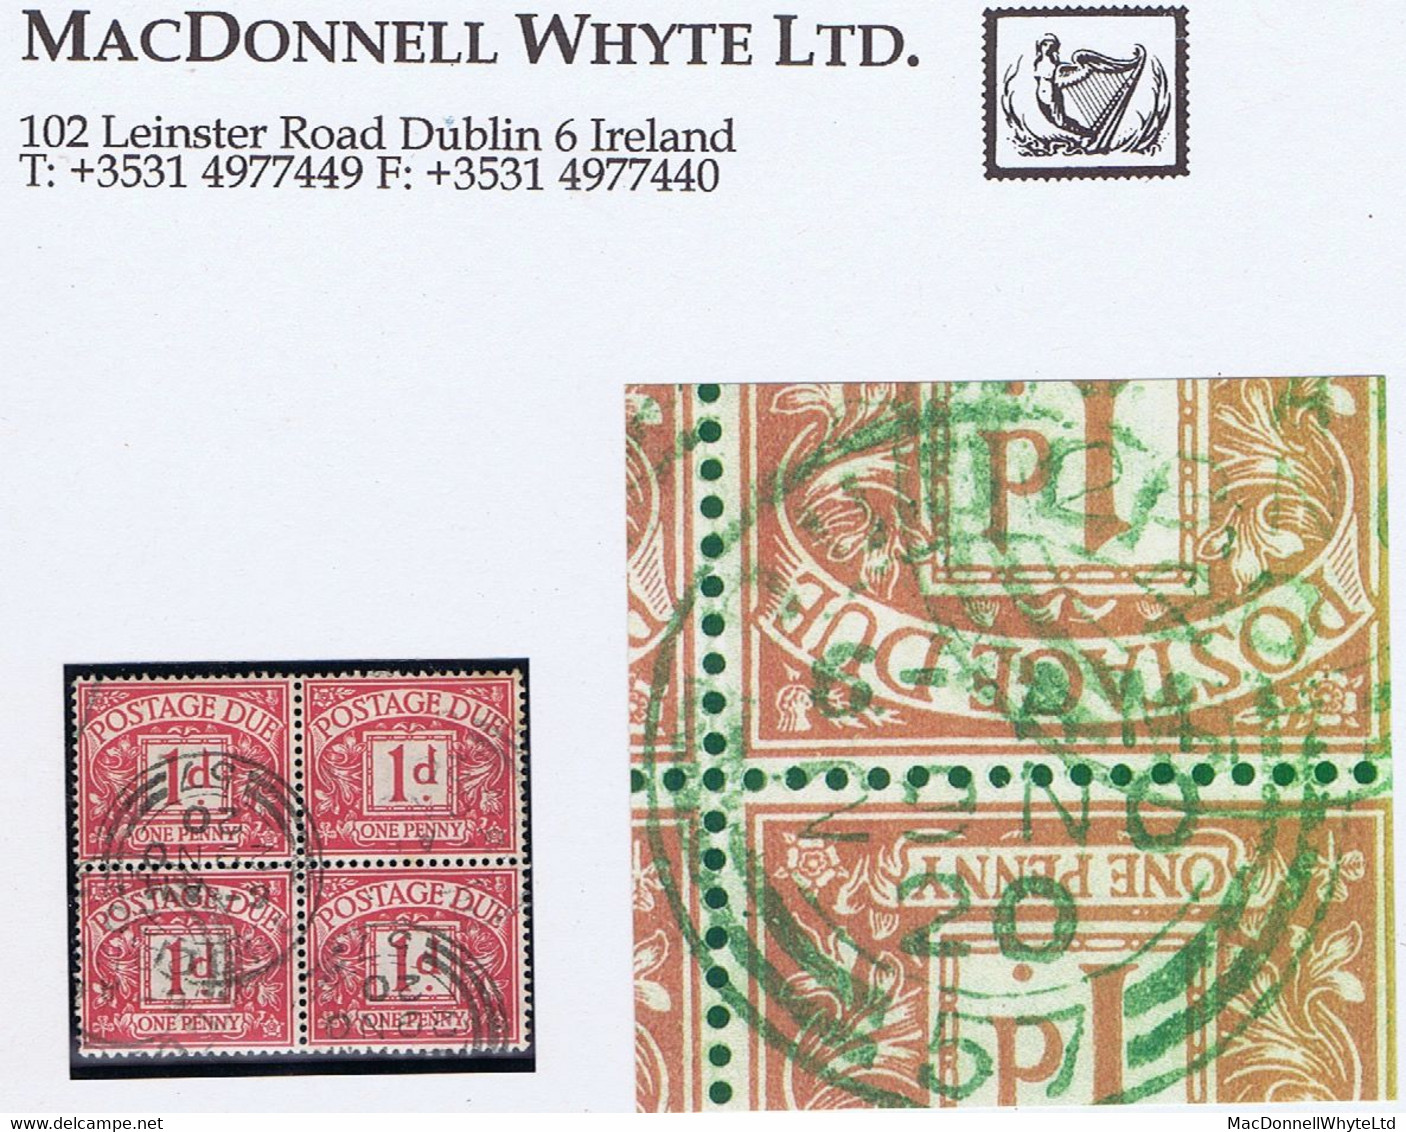 Ireland Postage Due 1920 British POSTAGE DUE 1d Block Of 4 Used With Cds DUBLIN 29 NO 20 Code 57 - Segnatasse